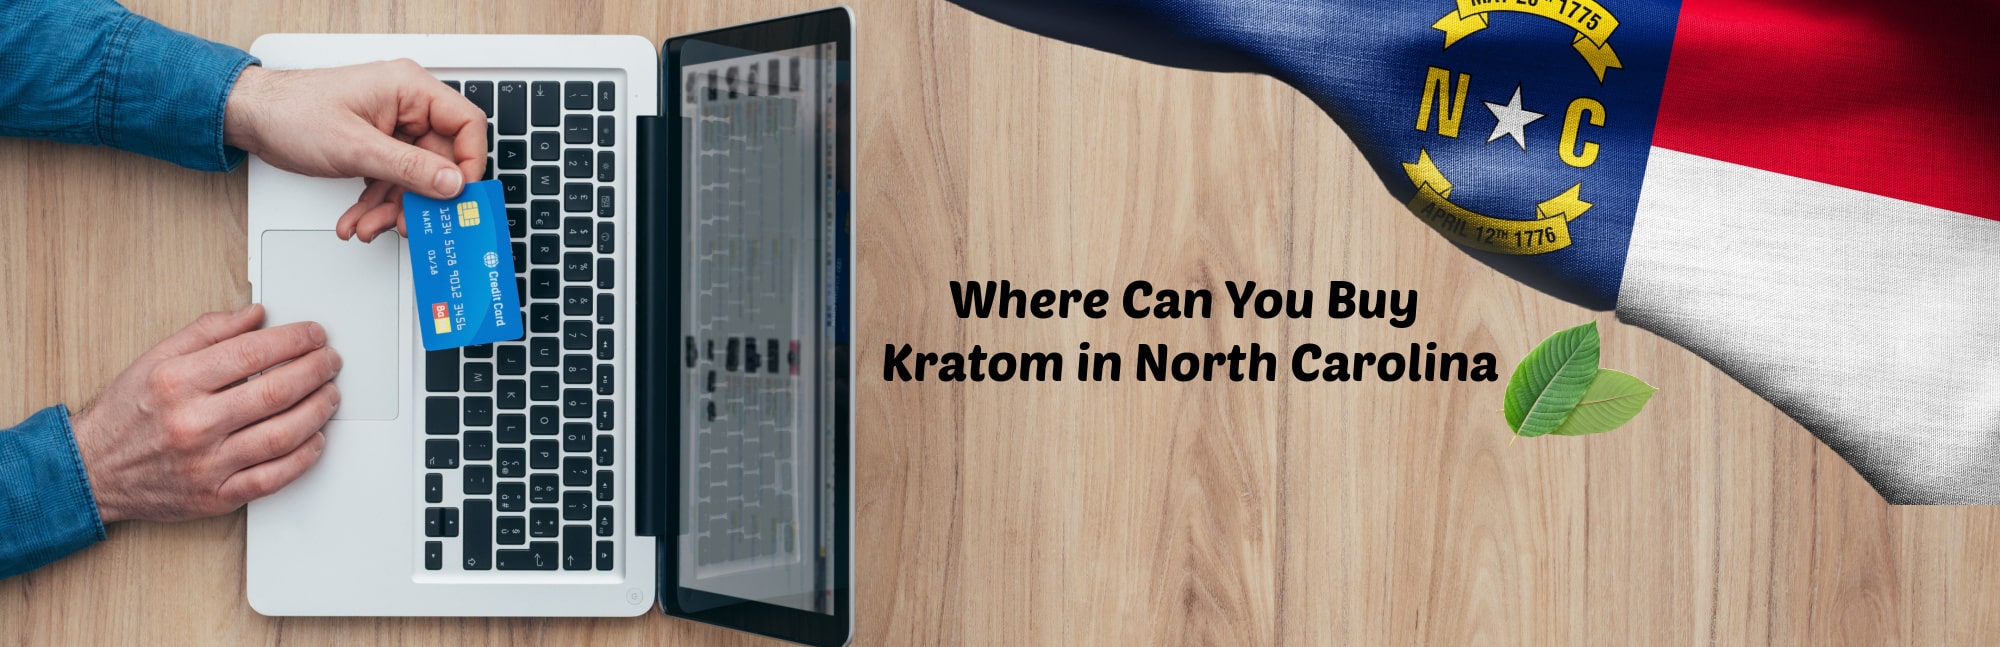 image of where can you buy kratom in north carolina